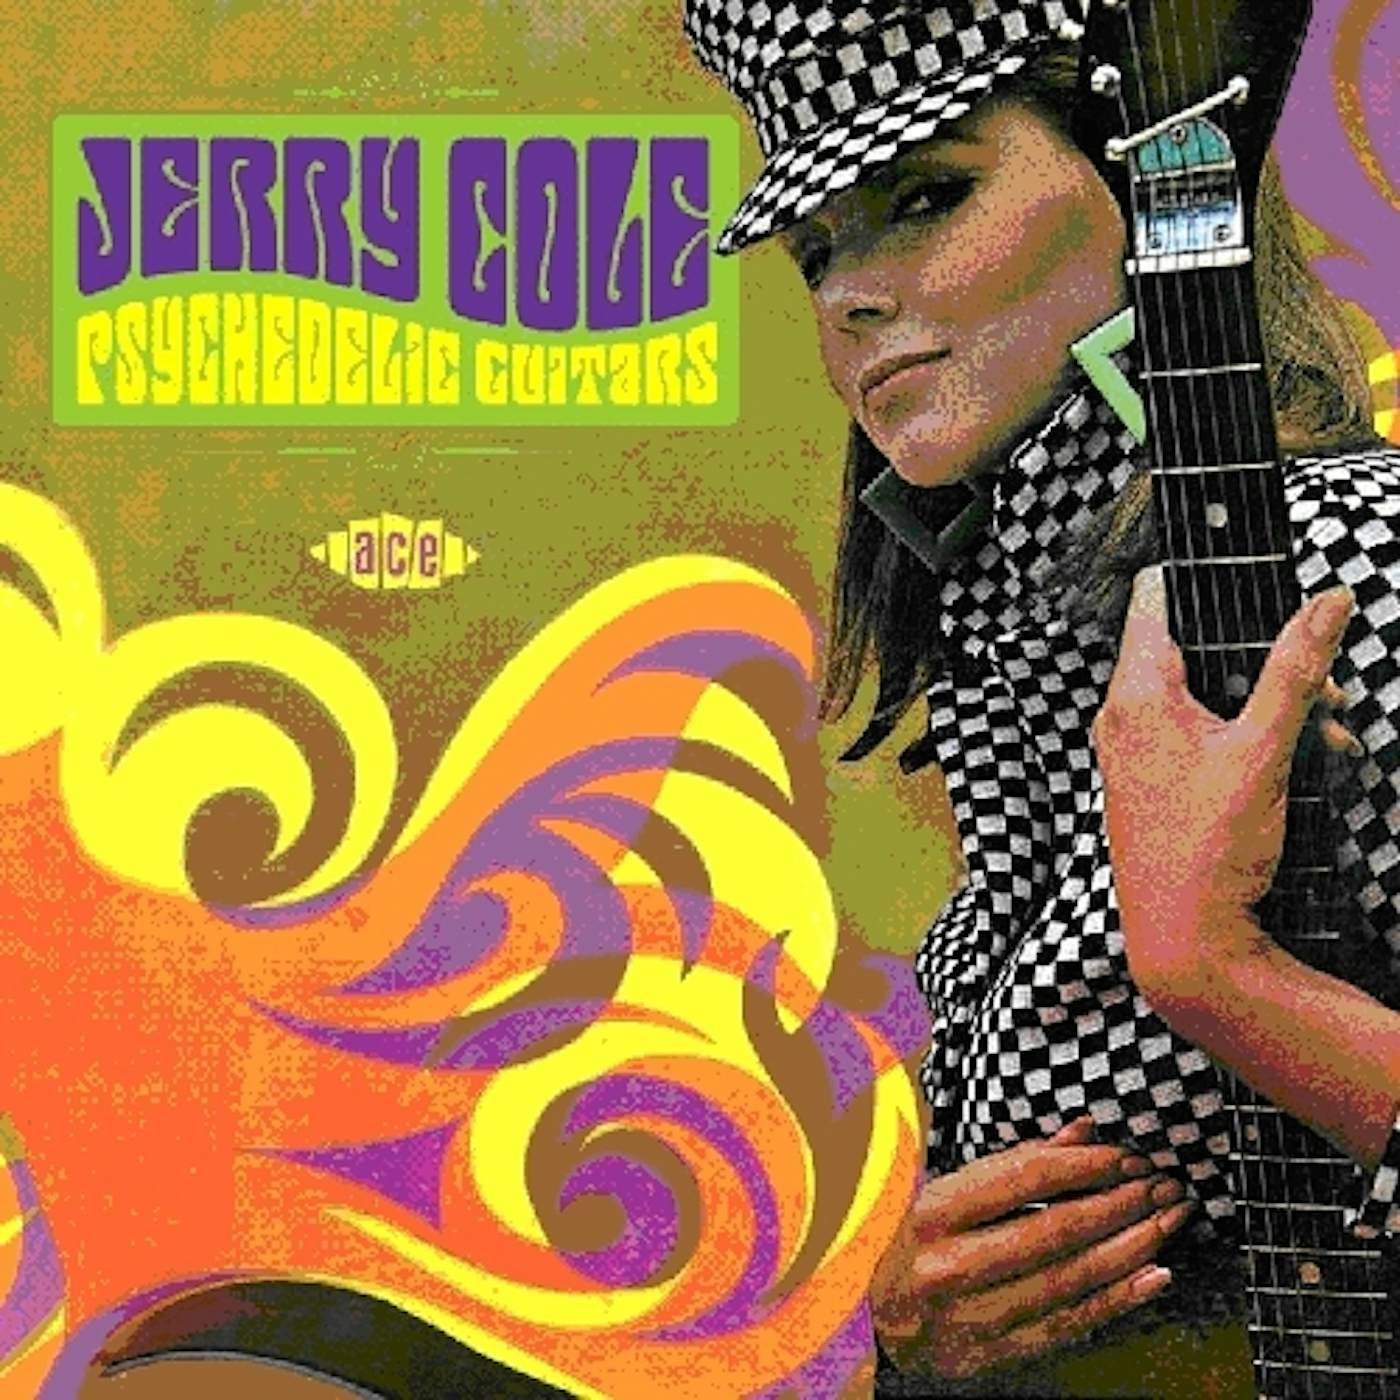 Jerry Cole PSYCHEDELIC GUITARS CD